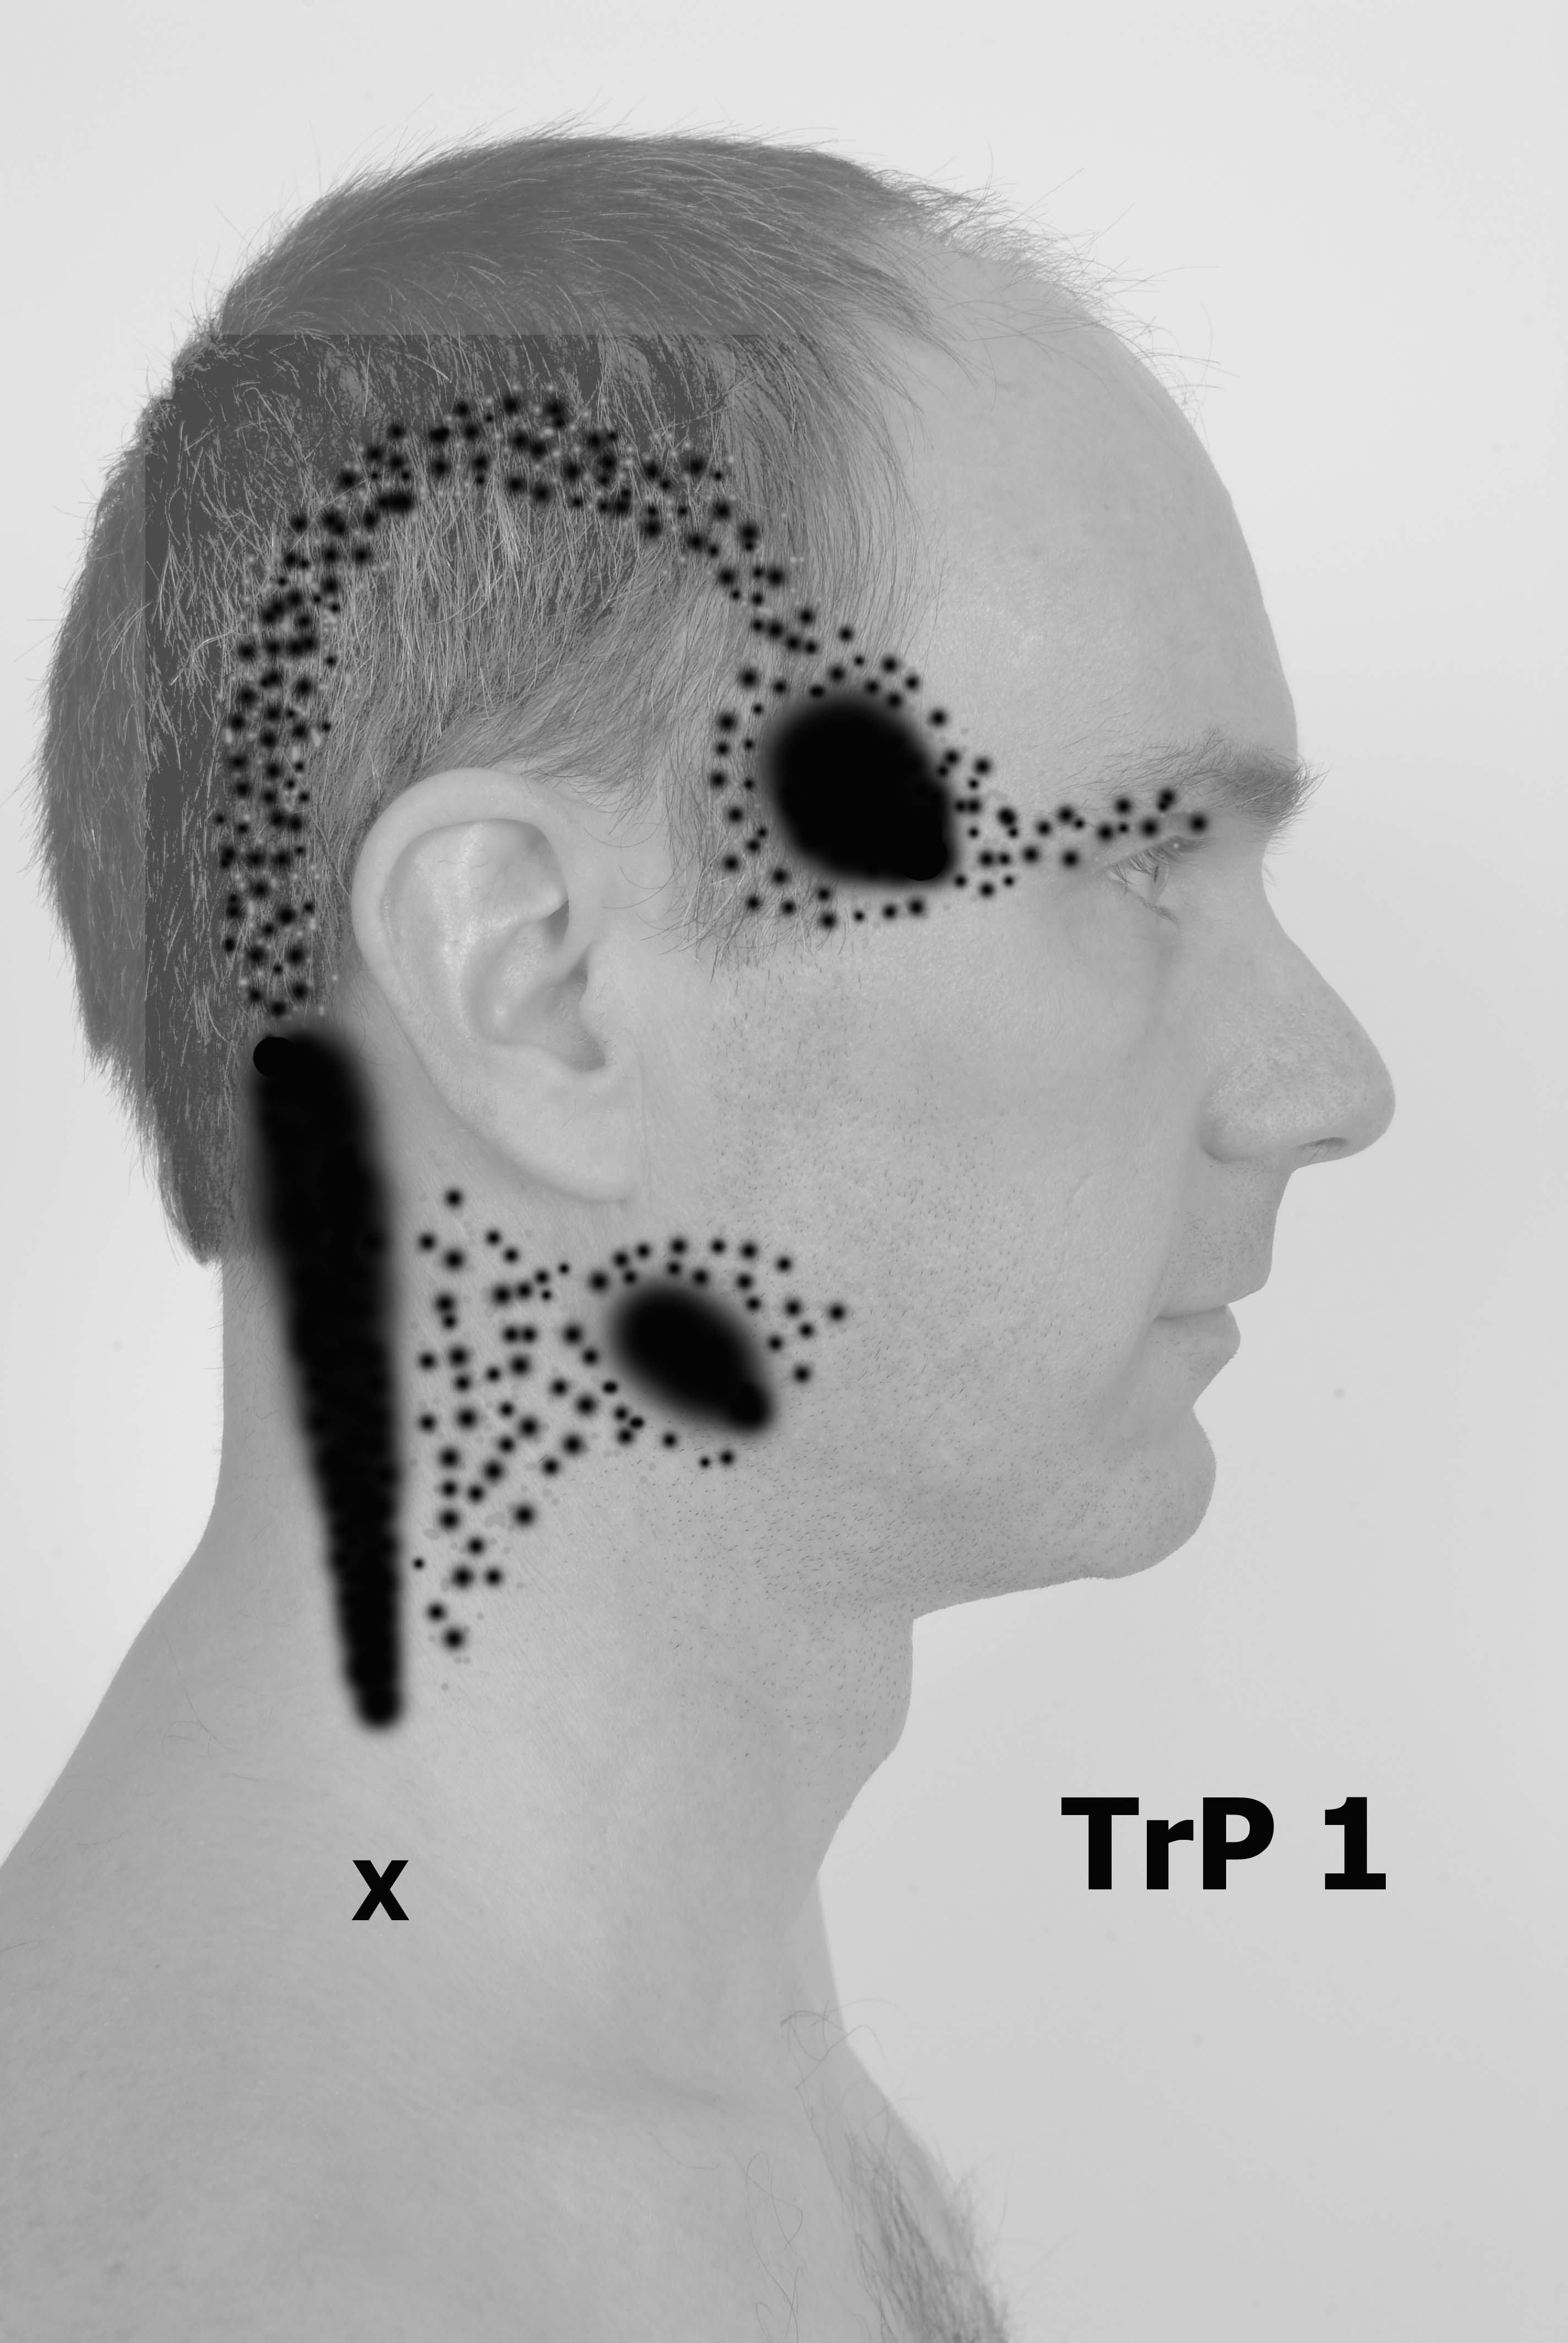 Trapezius Trigger Point 1 Referral Patterns - Black and White